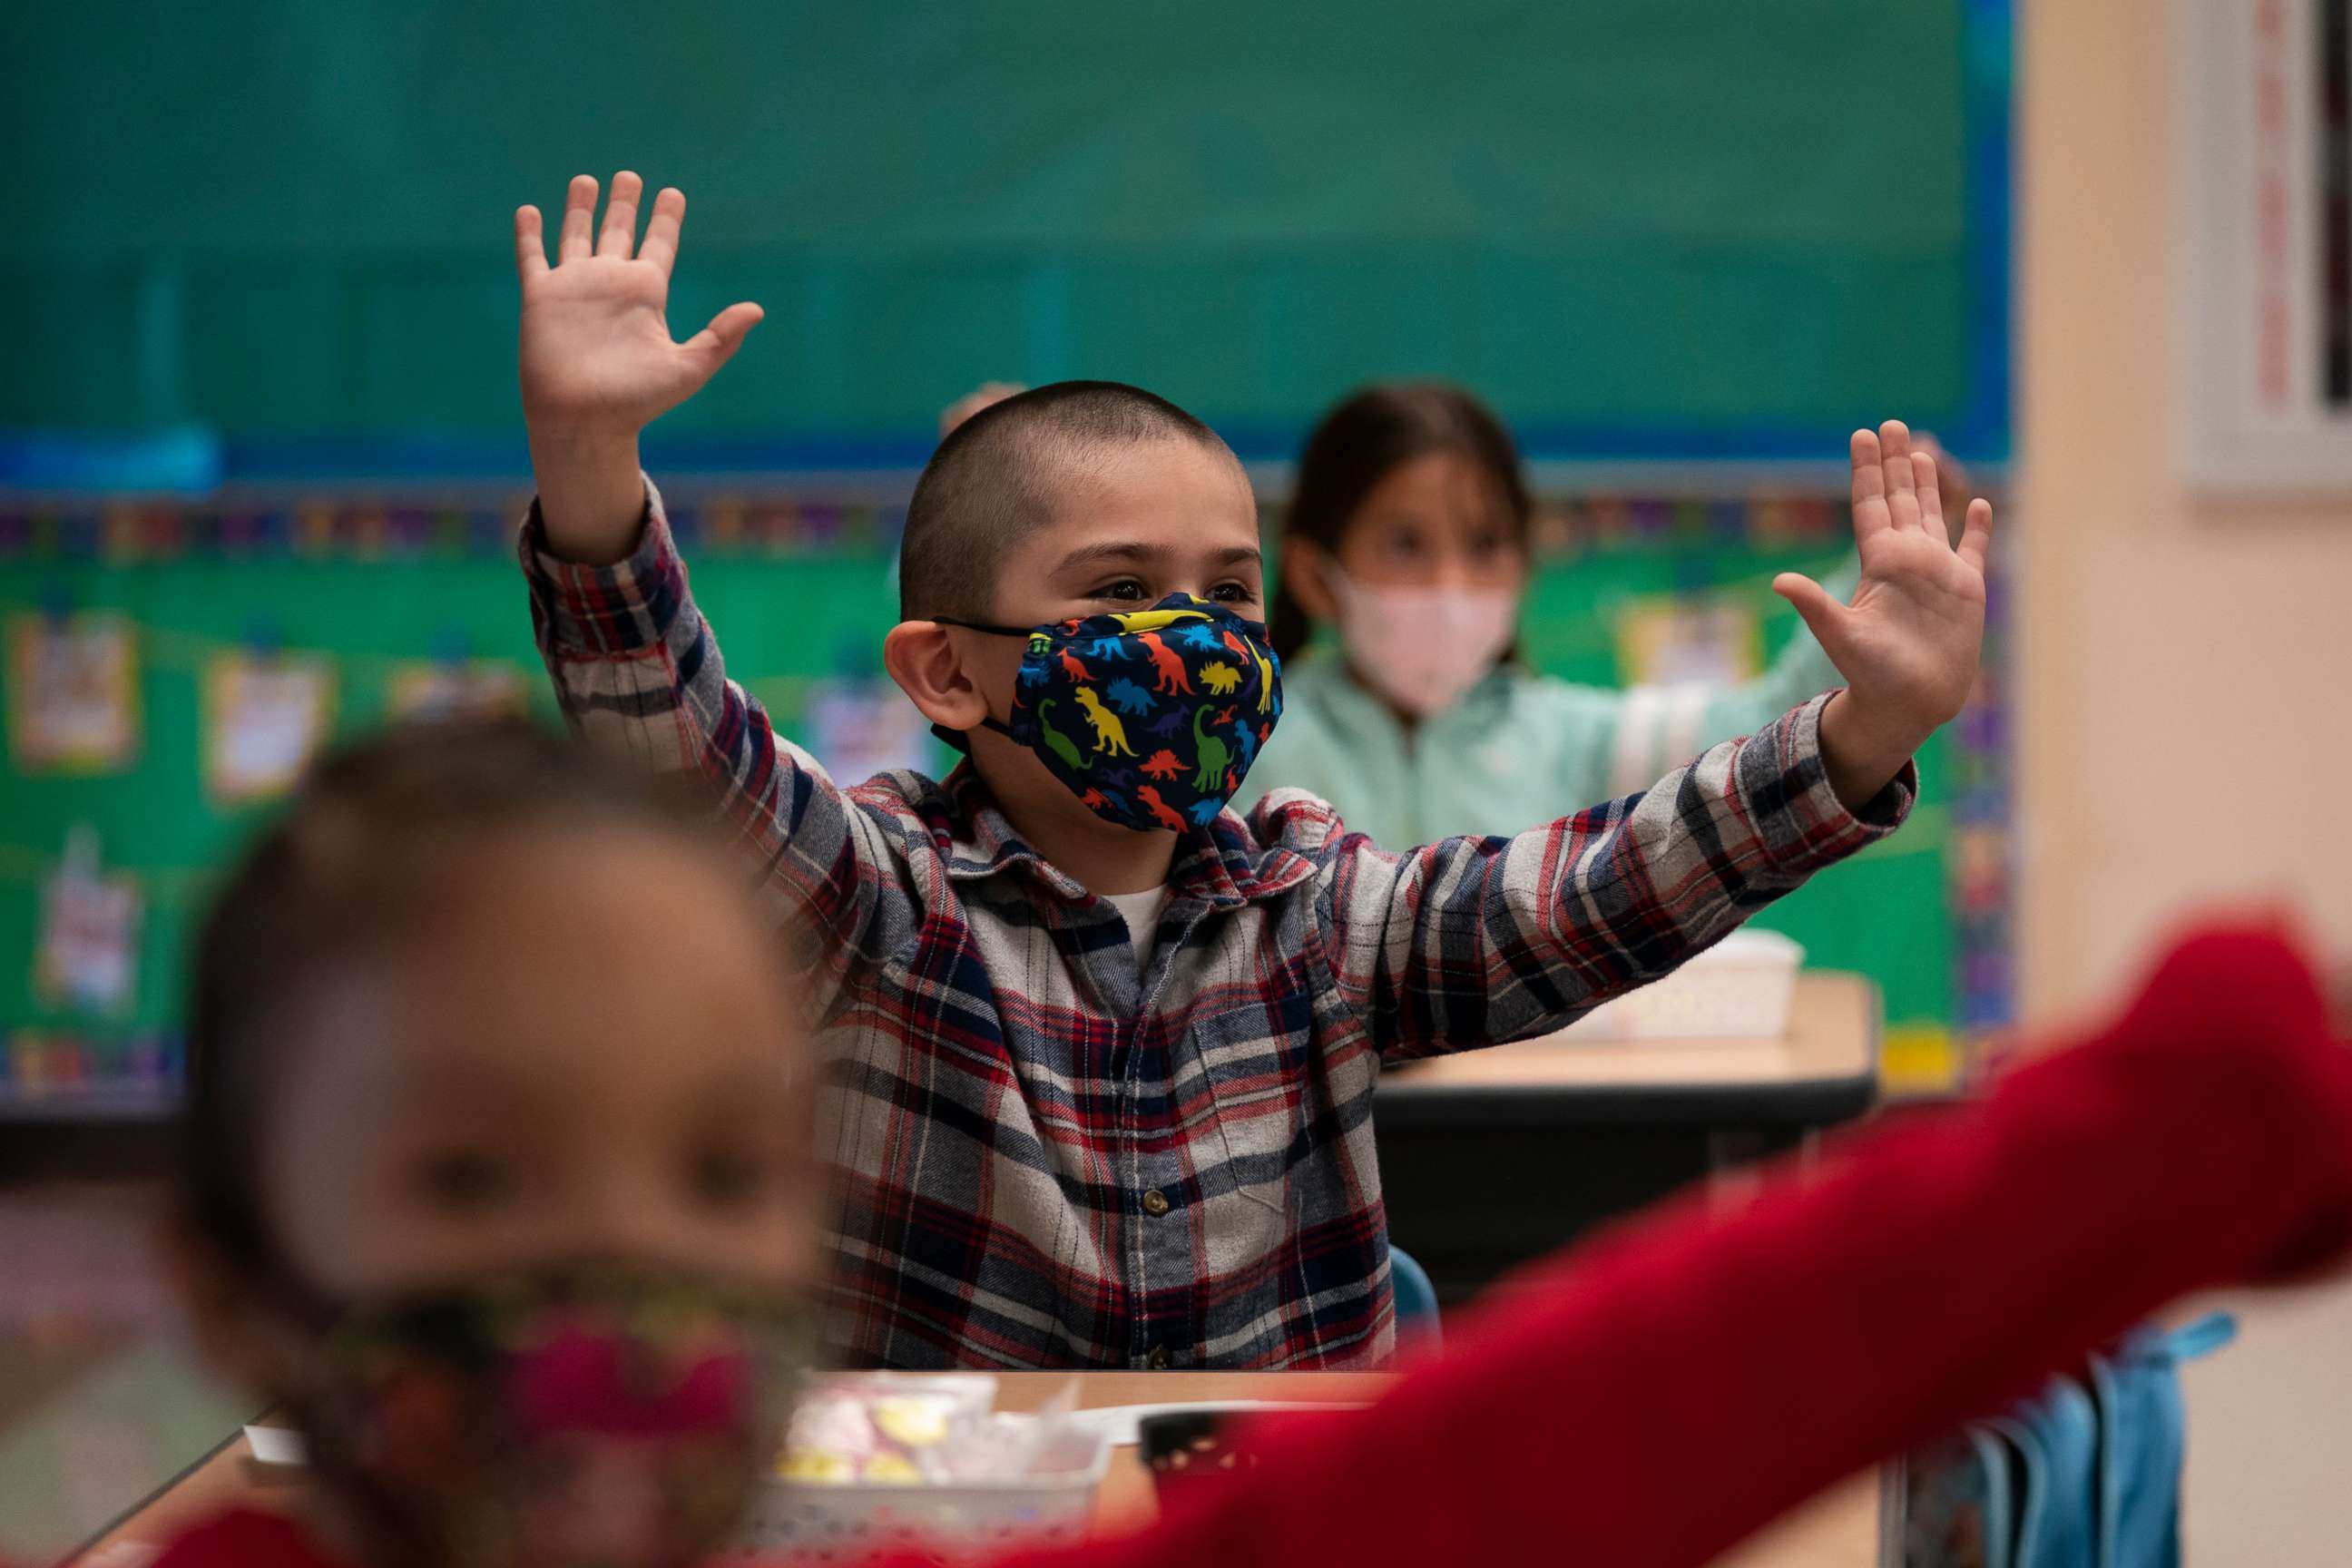 PHOTO: Kindergarten students participate in a classroom activity on the first day of in-person learning at Maurice Sendak Elementary School in Los Angeles, April 13, 2021.